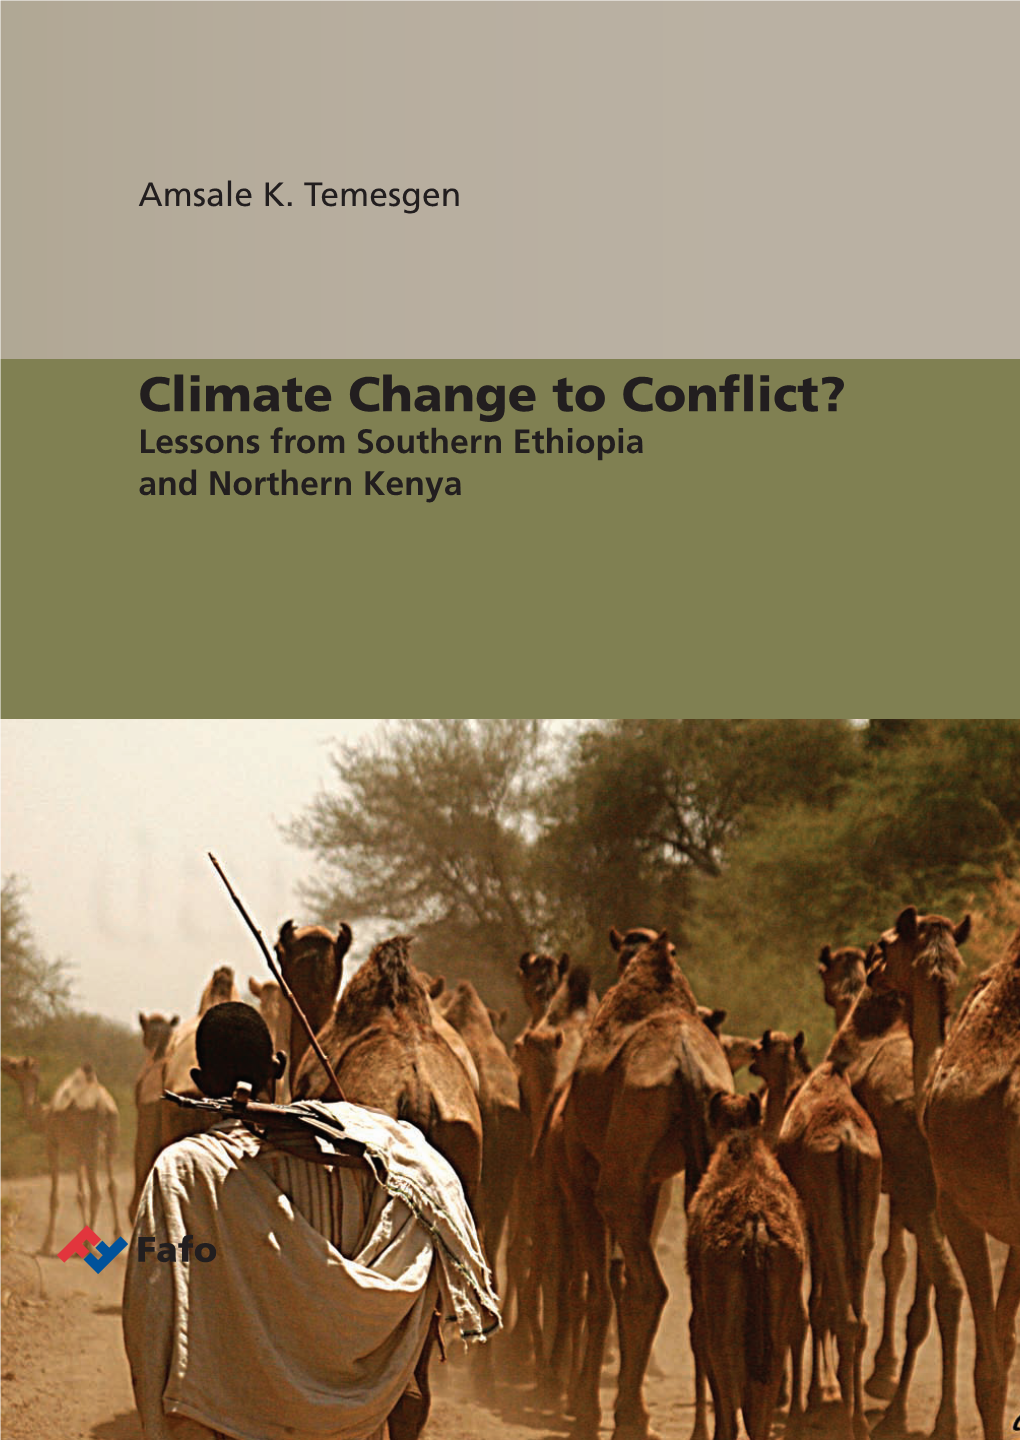 Climate Change to Conflict? Amsale K